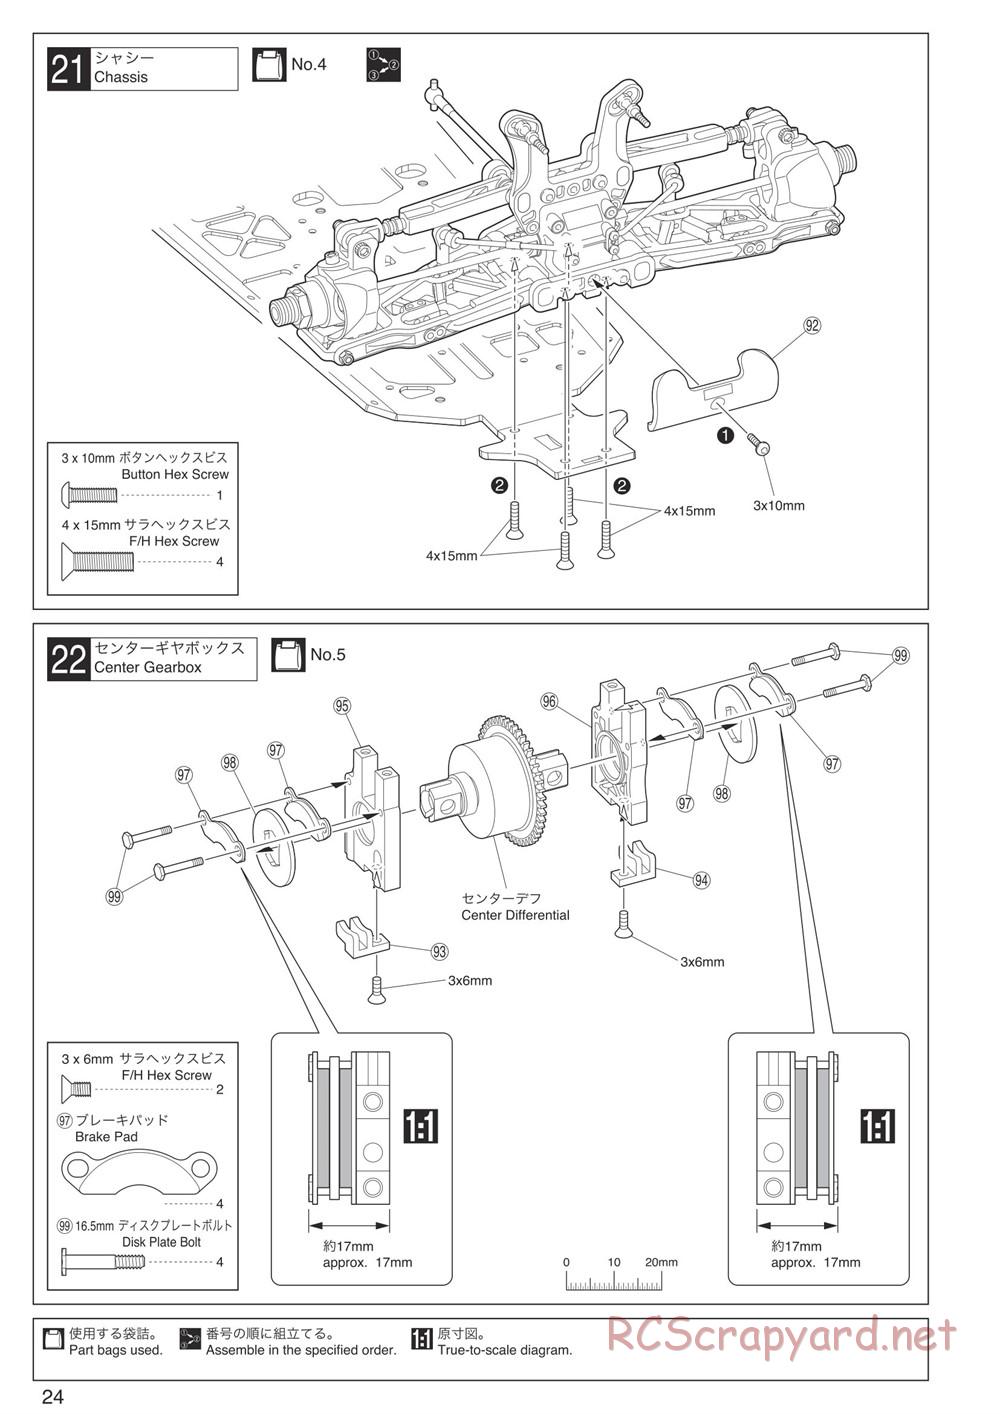 Kyosho - Inferno MP9 TKI4 10th Anniversary Special Edition - Manual - Page 24